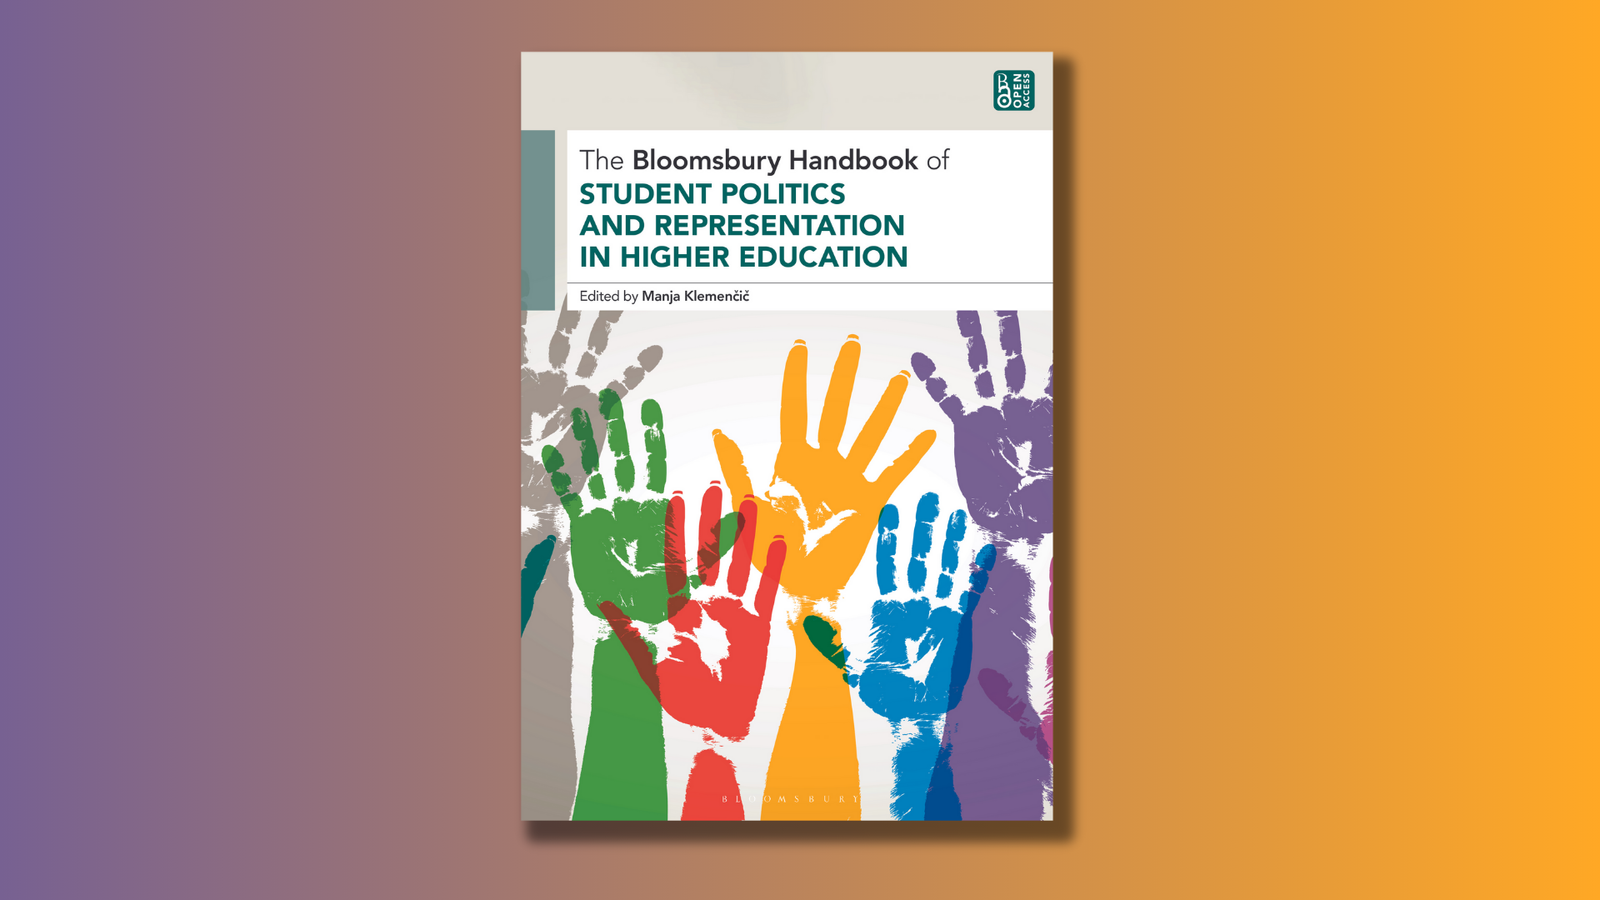 Launch of The Bloomsbury Handbook of Student Politics and Representation in Higher Education